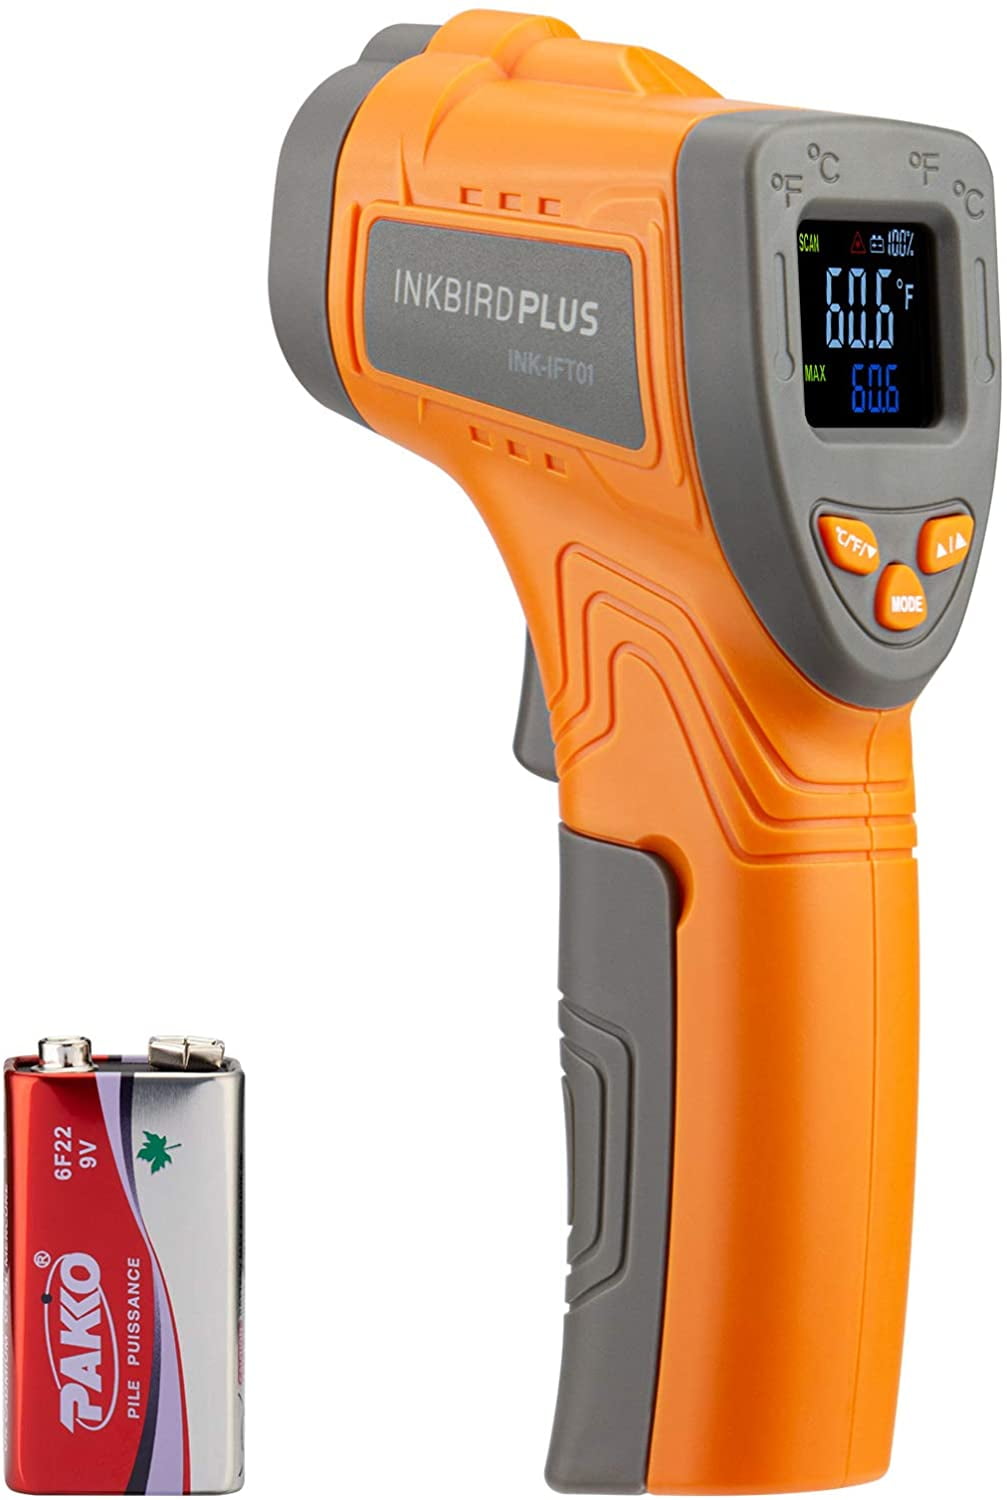 PEAKMETER PM6530C Infrared Thermometer Hand Held Meter For Non Contact And K Type Thermocouple Temperature Measurement Digital Infrared Thermometer 